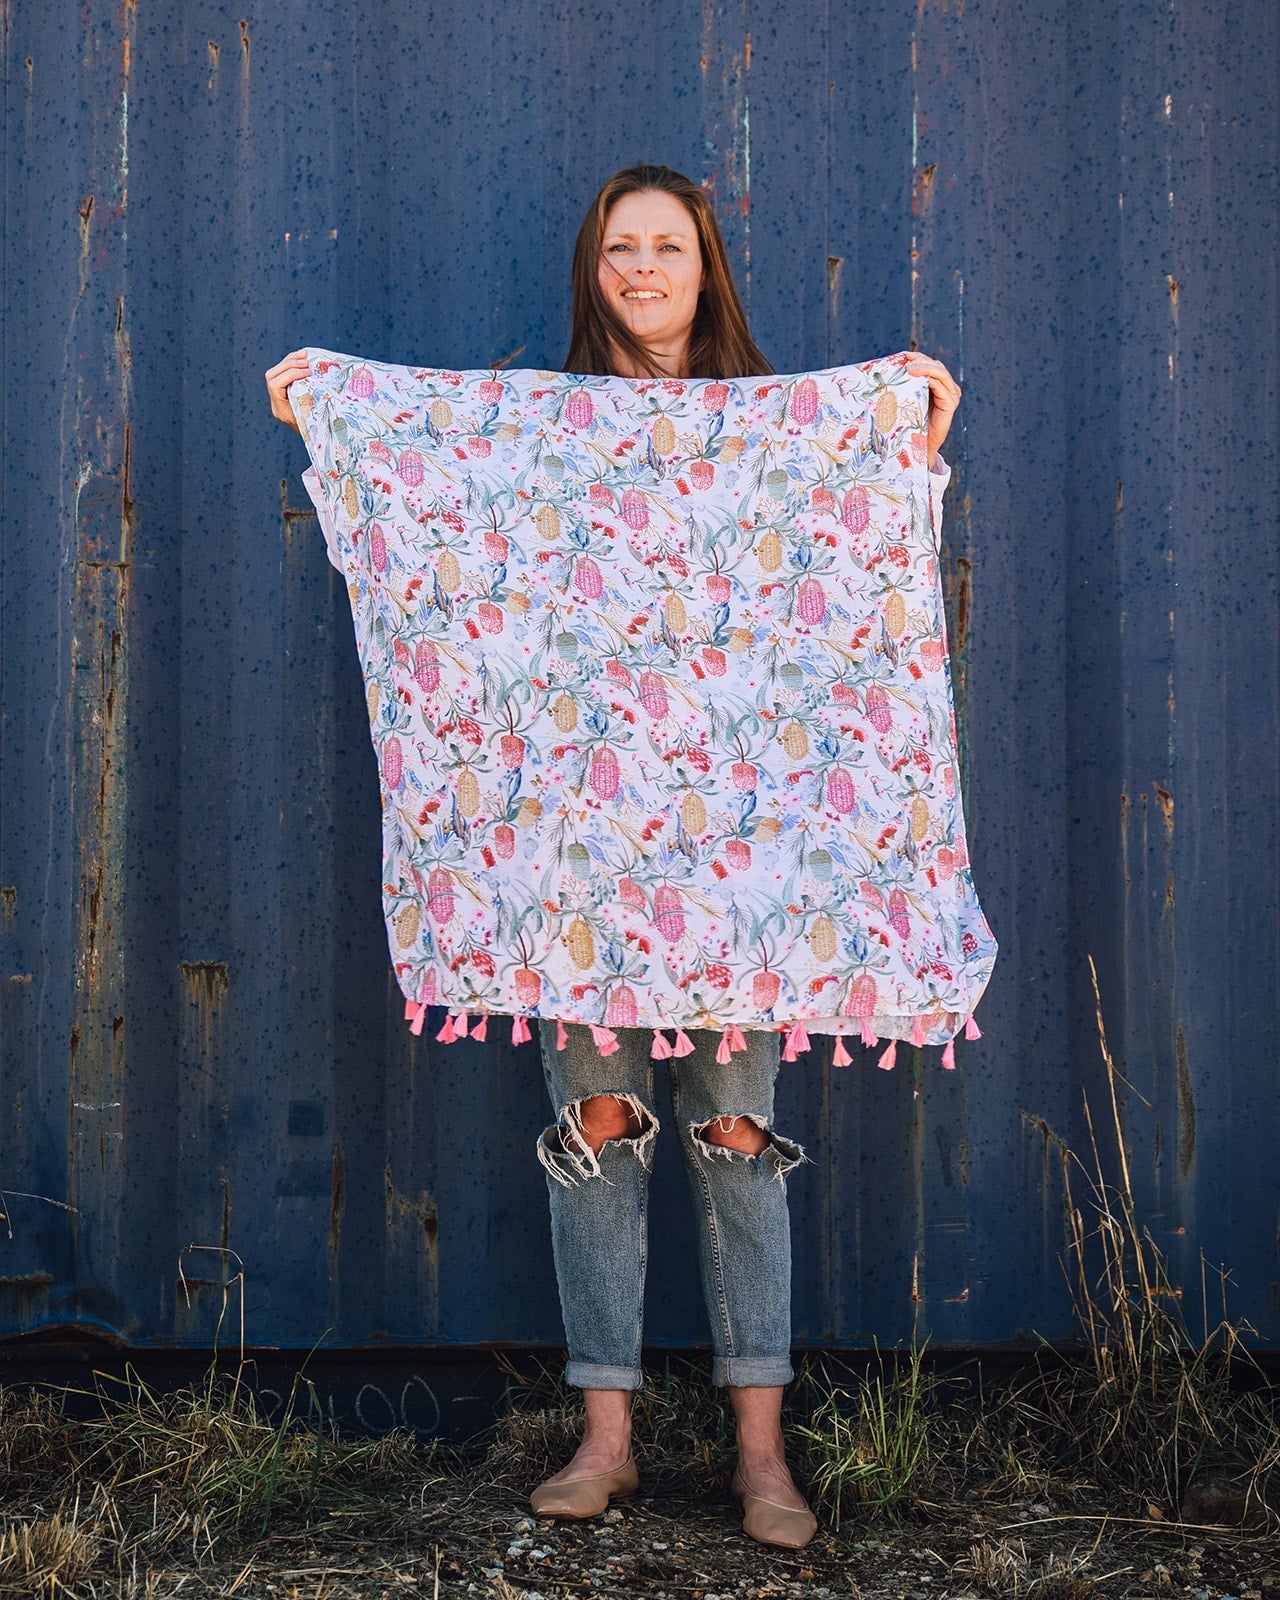 Abby Australiana Women's Scarf: Australian botanical print featuring waratahs, bottle brushes, and eucalypts in pinks, greens, blues, and muted yellows on a white background. Charming pink tassels at each end. Polyester blend for a soft and comfortable we